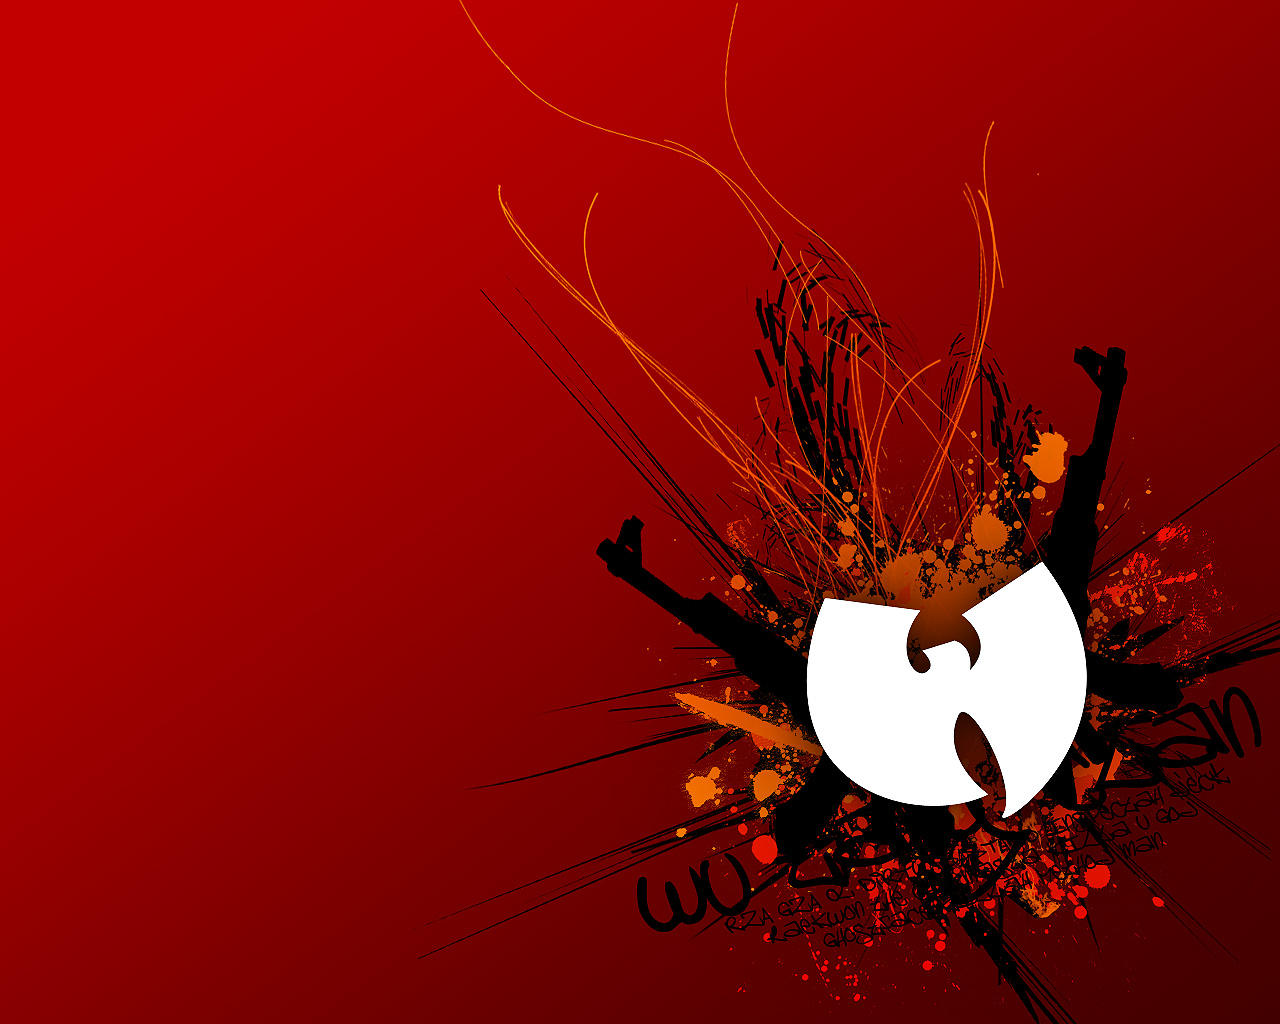 Wu-Tang Tribute Wallpaper by ~Adept- on deviantART